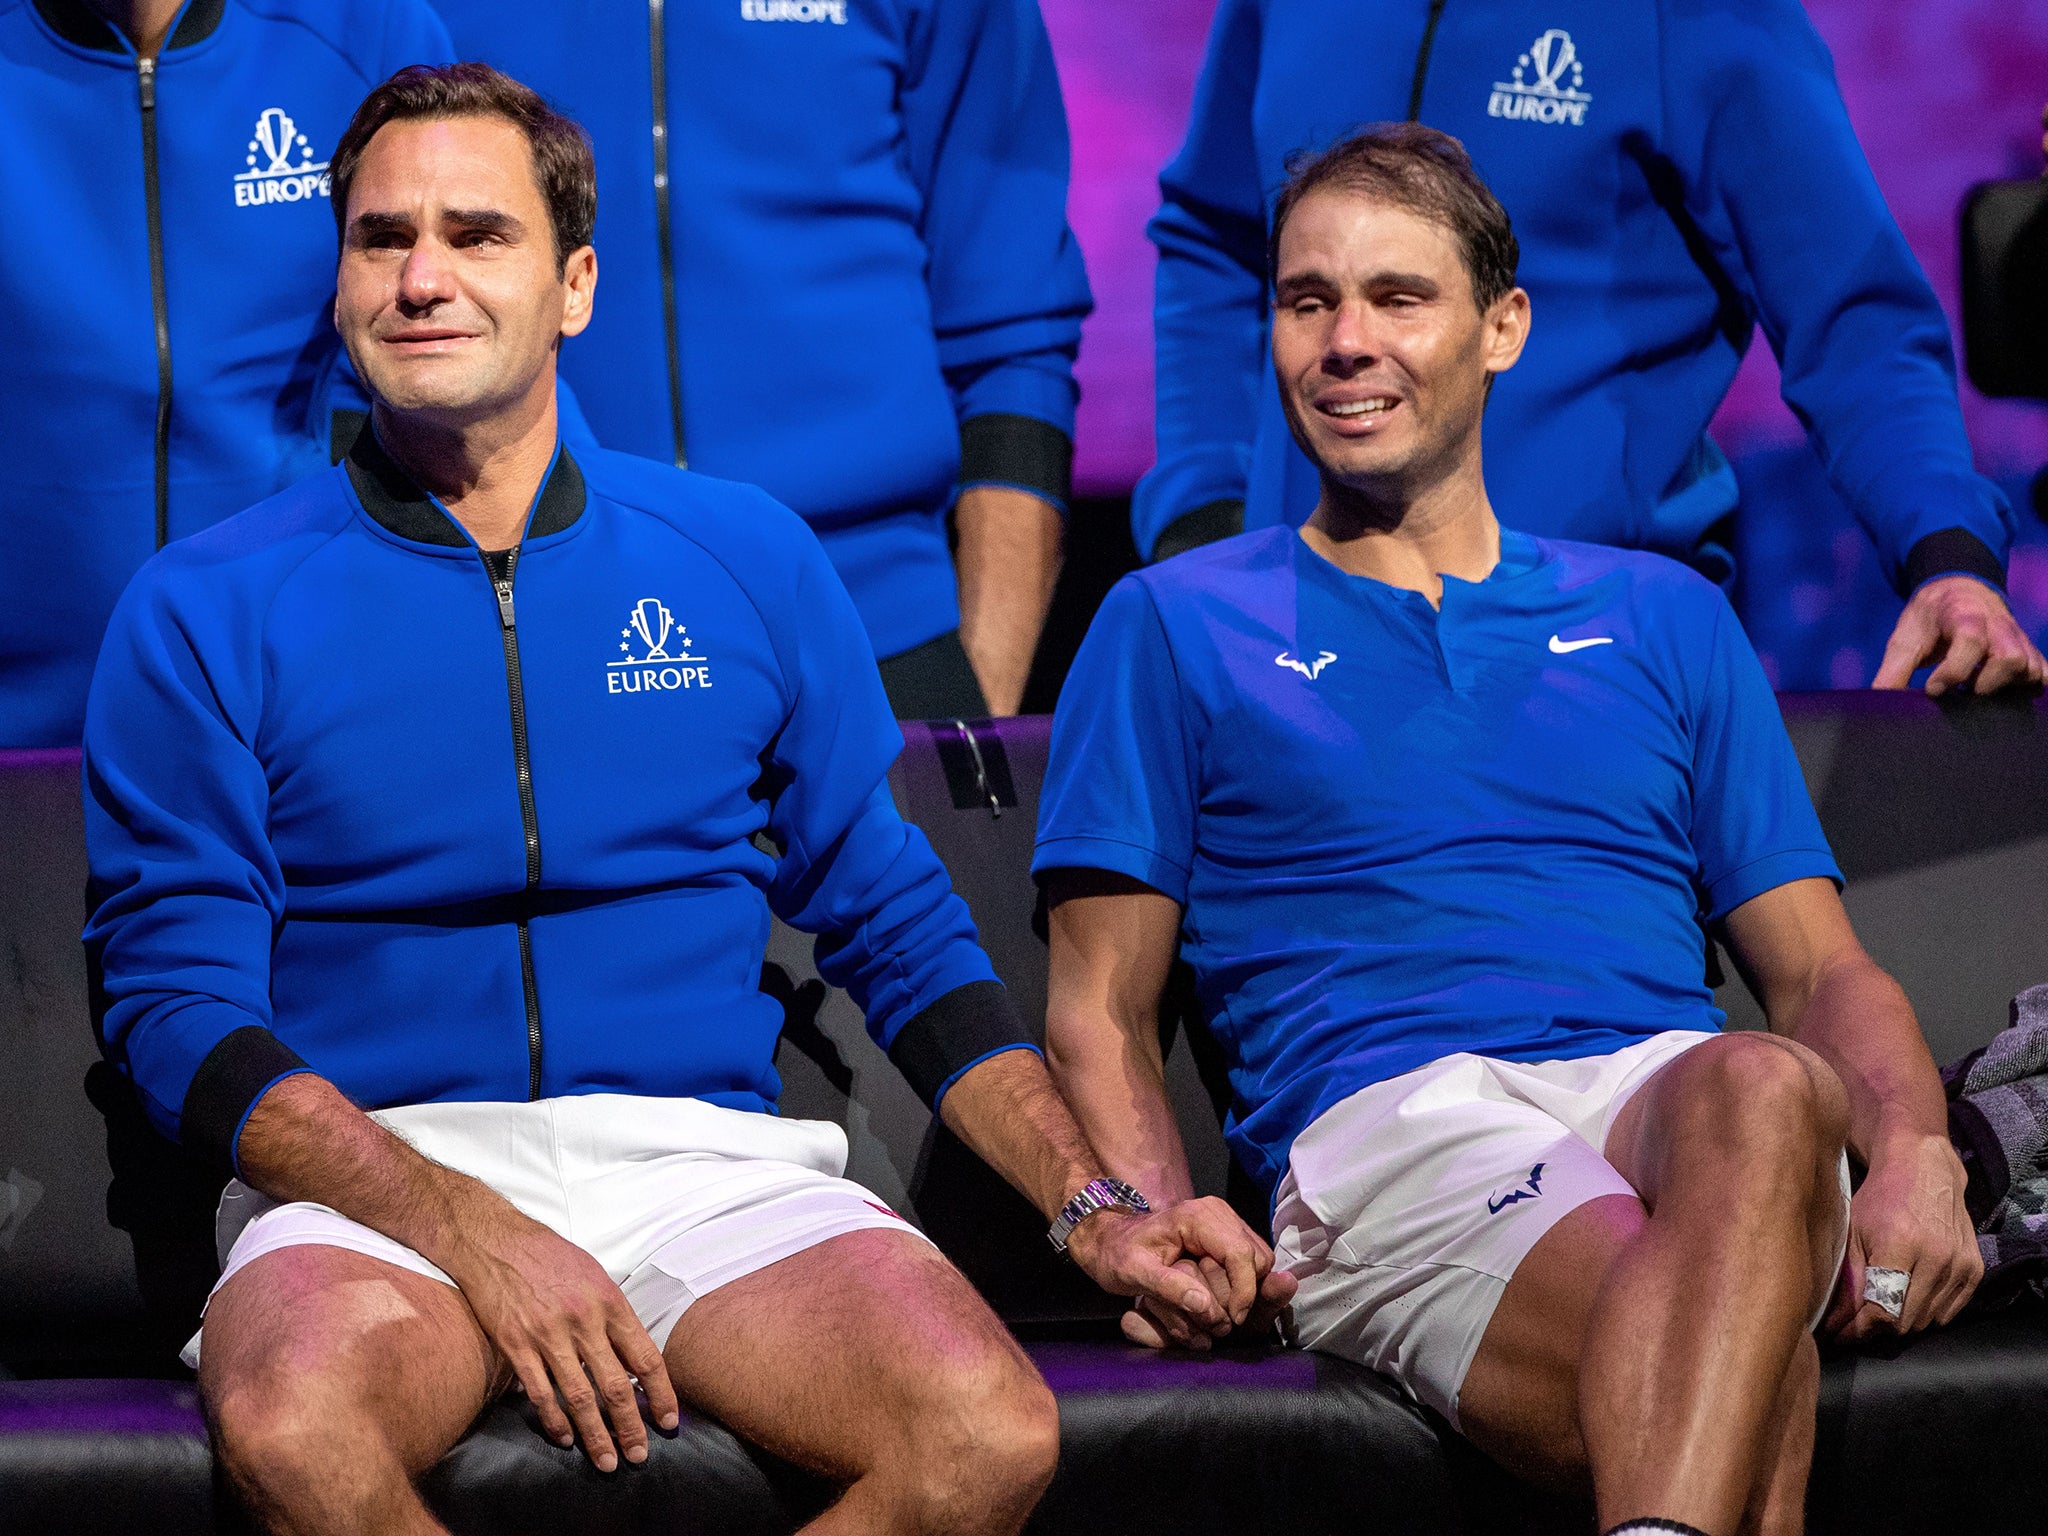 Roger Federer and Rafael Nadal hold hands during the Laver Cup last week